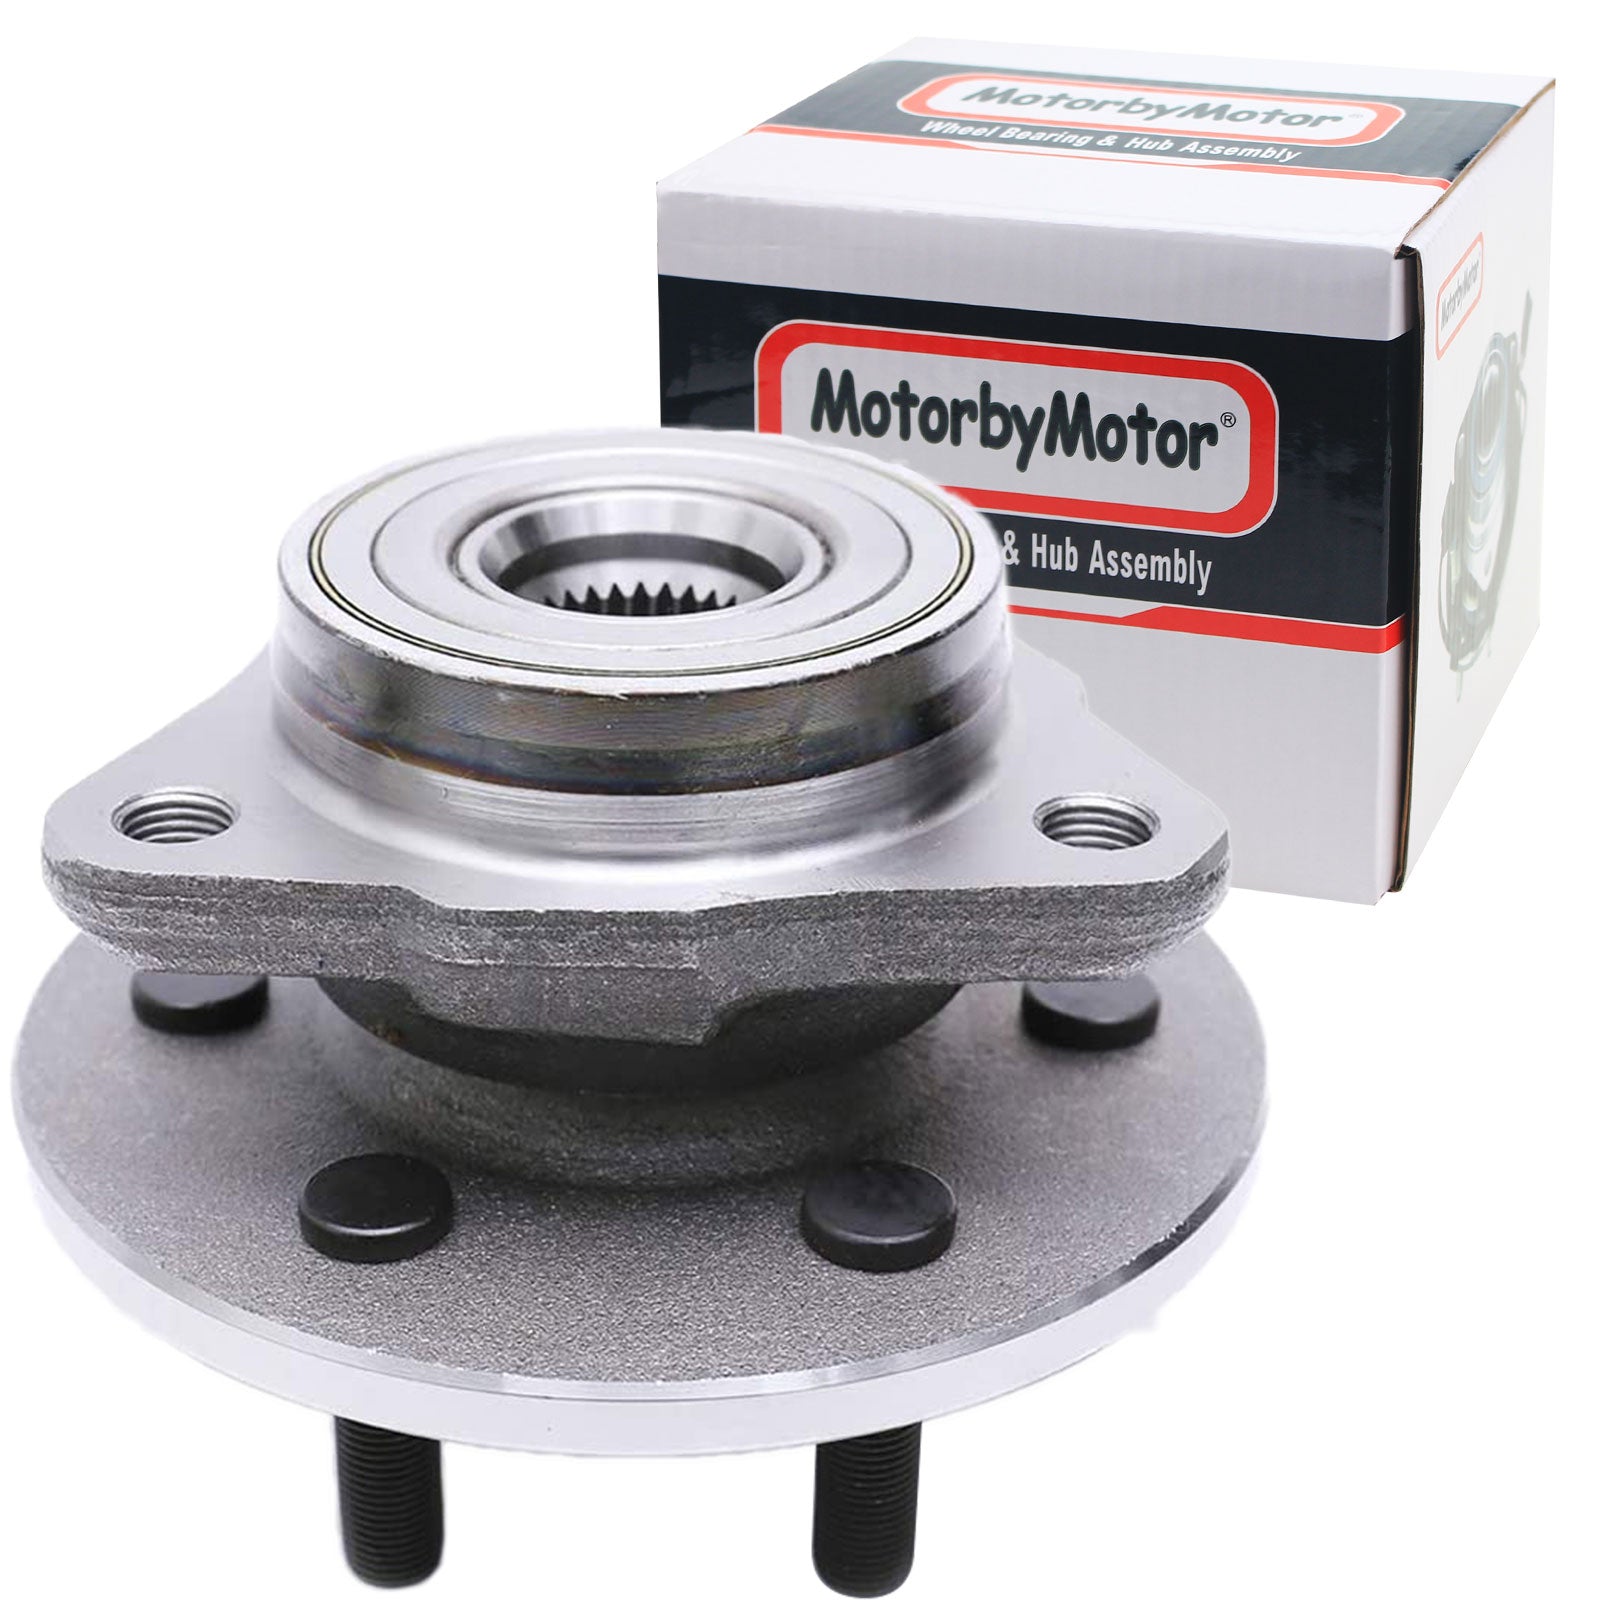 MotorbyMotor 515007 Front Wheel Bearing and Hub Assembly 4WD with 6 Lugs Fits for Dodge Durango Dakota Low-Runout OE Directly Replacement Hub Bearing (4x4) MotorbyMotor